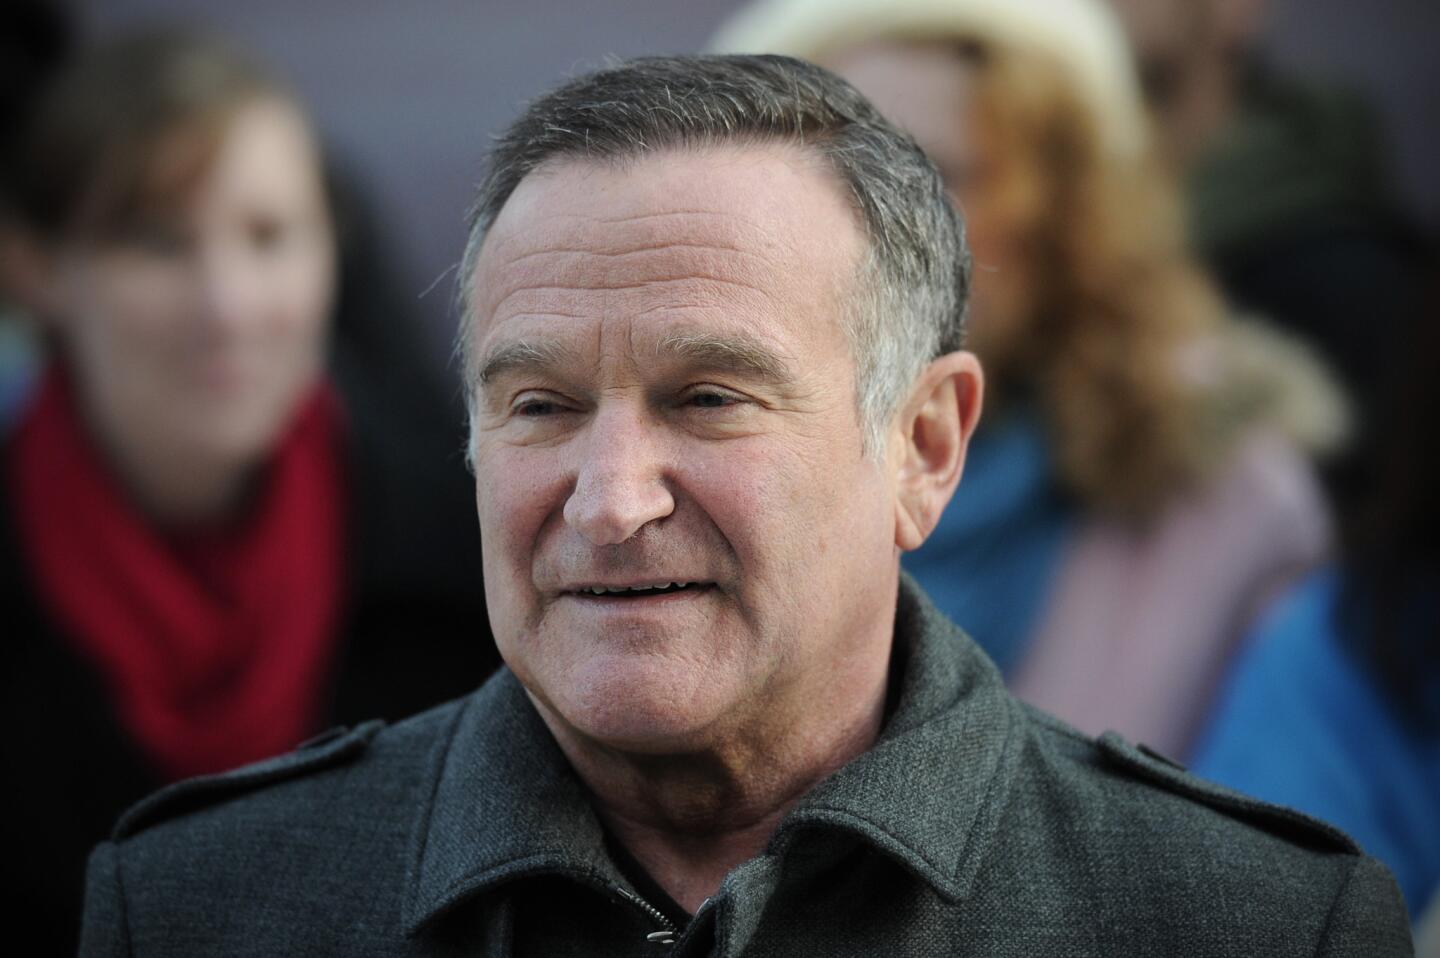 Oscar-winning actor and comic Robin Williams died August 11, 2014 of an apparent suicide. He was 63.